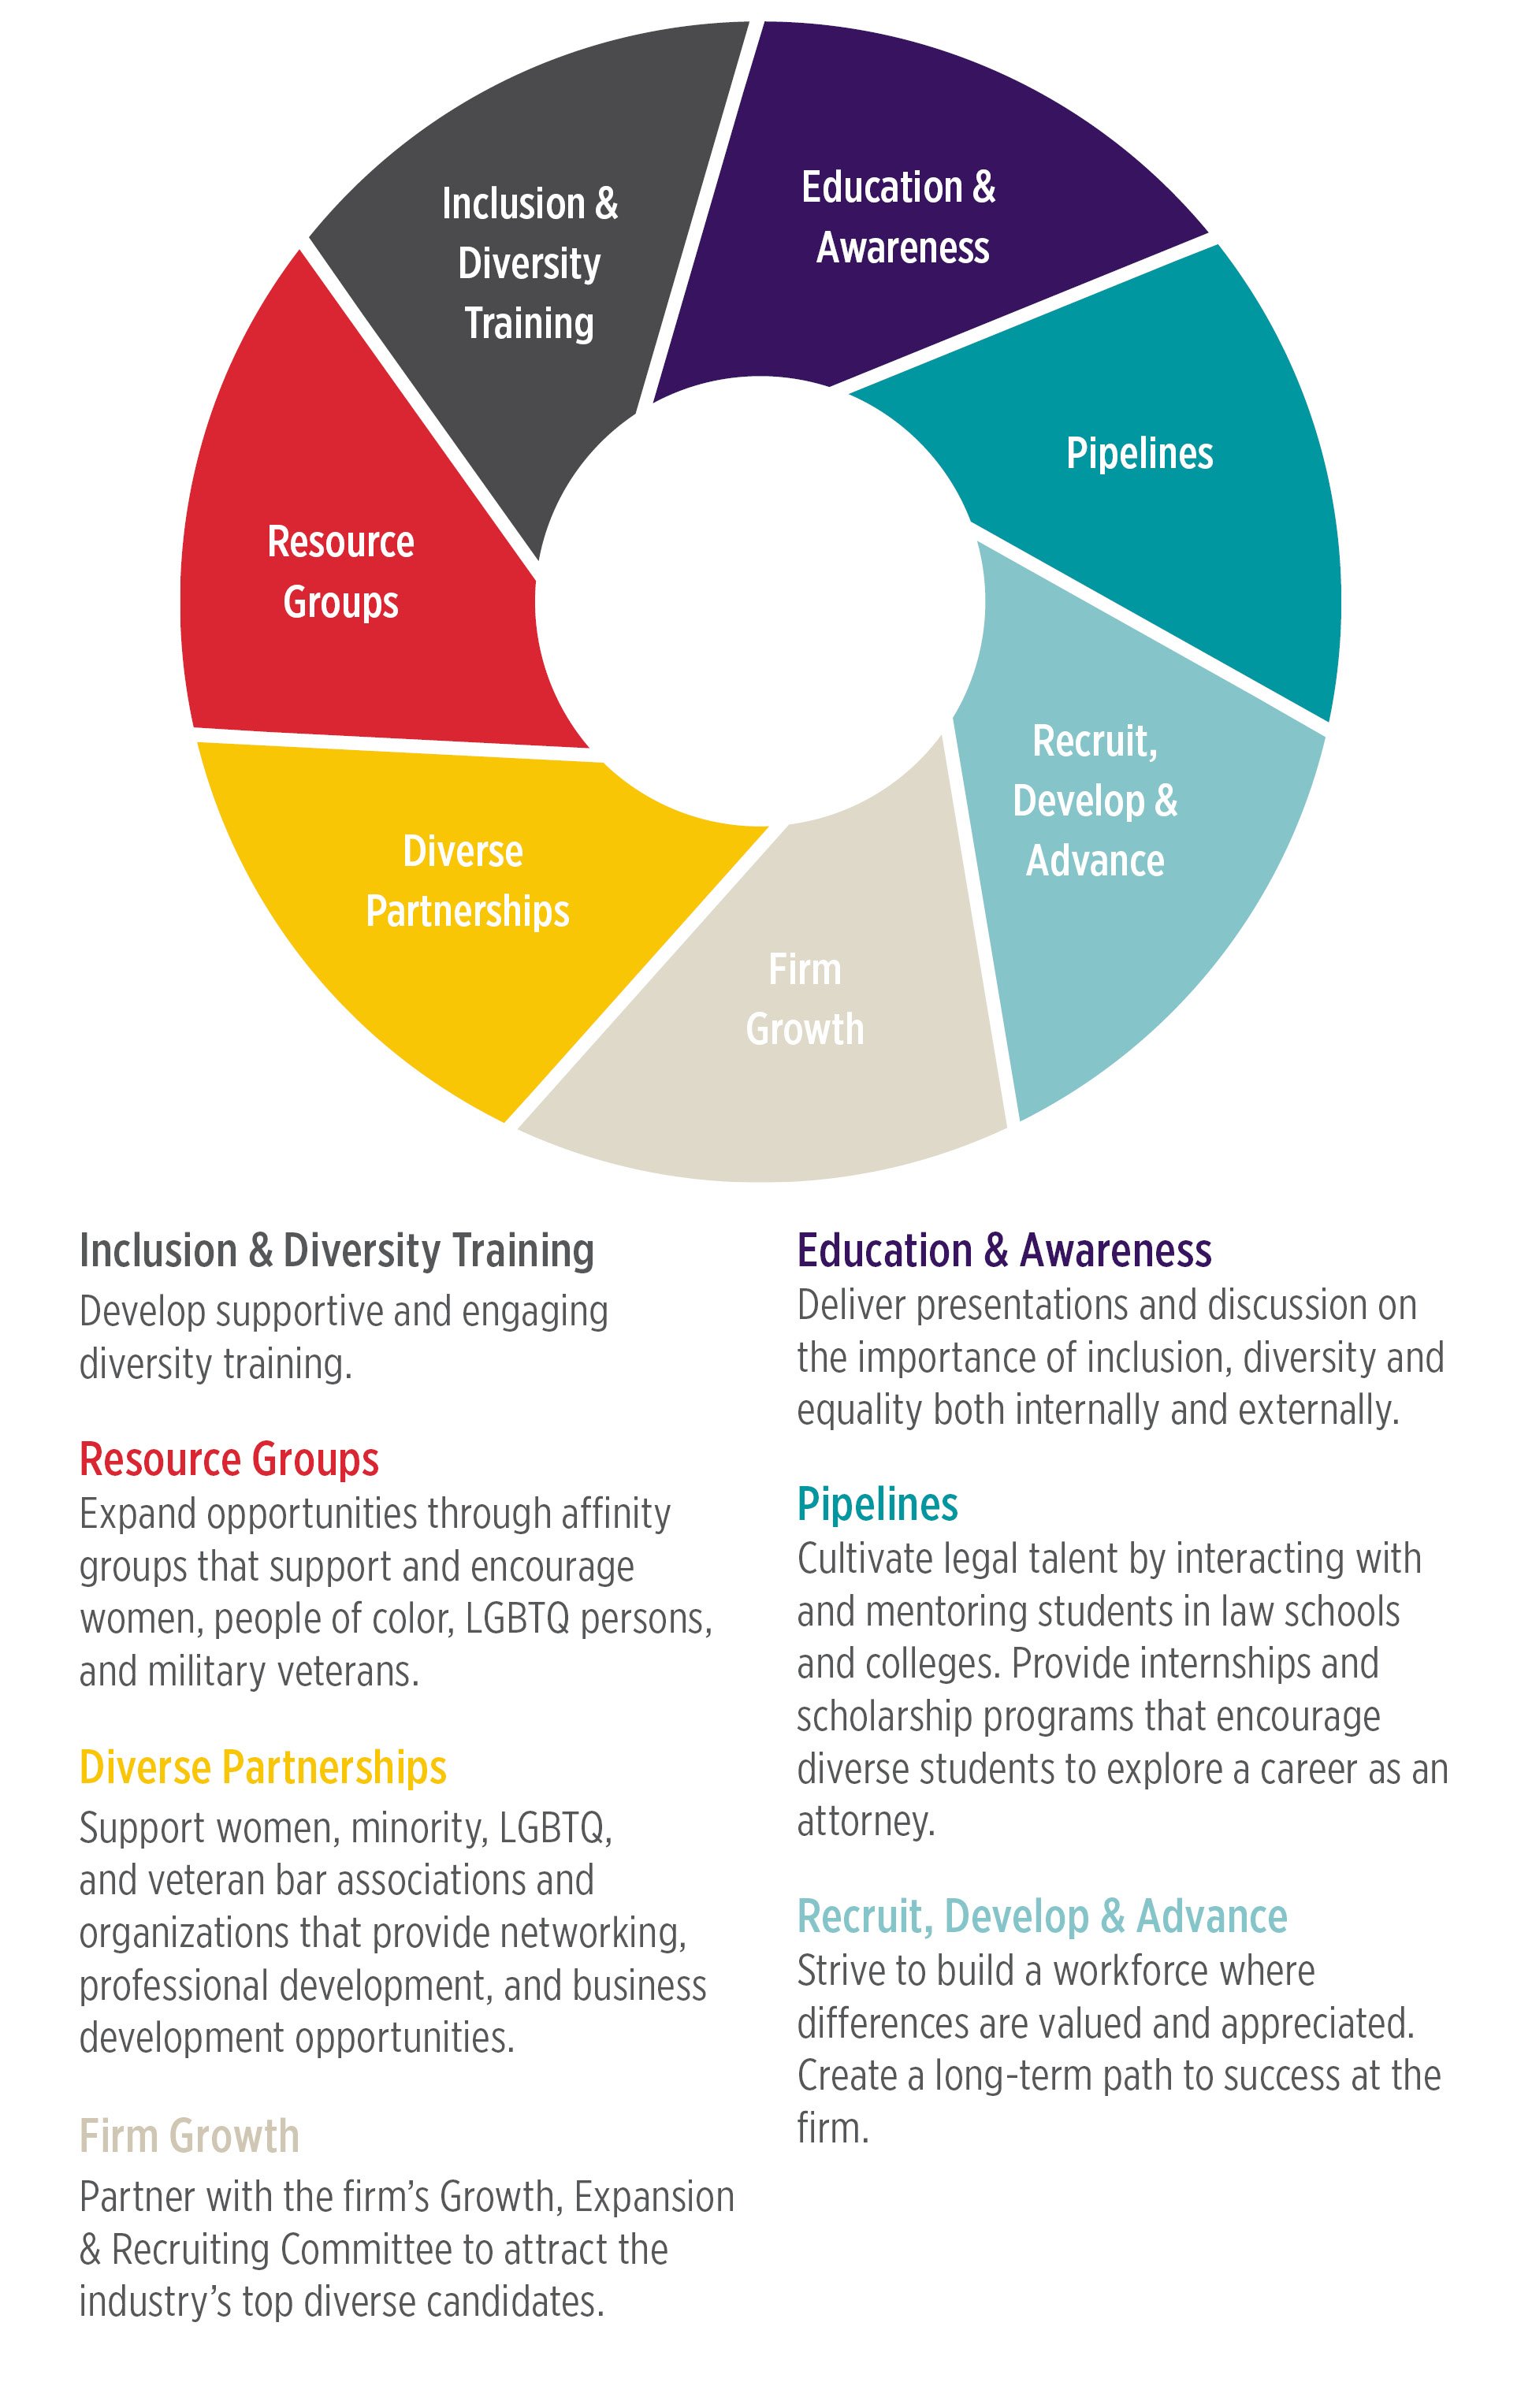 Inclusion and Diversity Goals Wheel Infographic | Training, Resource Groups, Diverse Partnerships, Firm Growth, Education and Awareness, Pipelines, Recruit, Develop and Advance